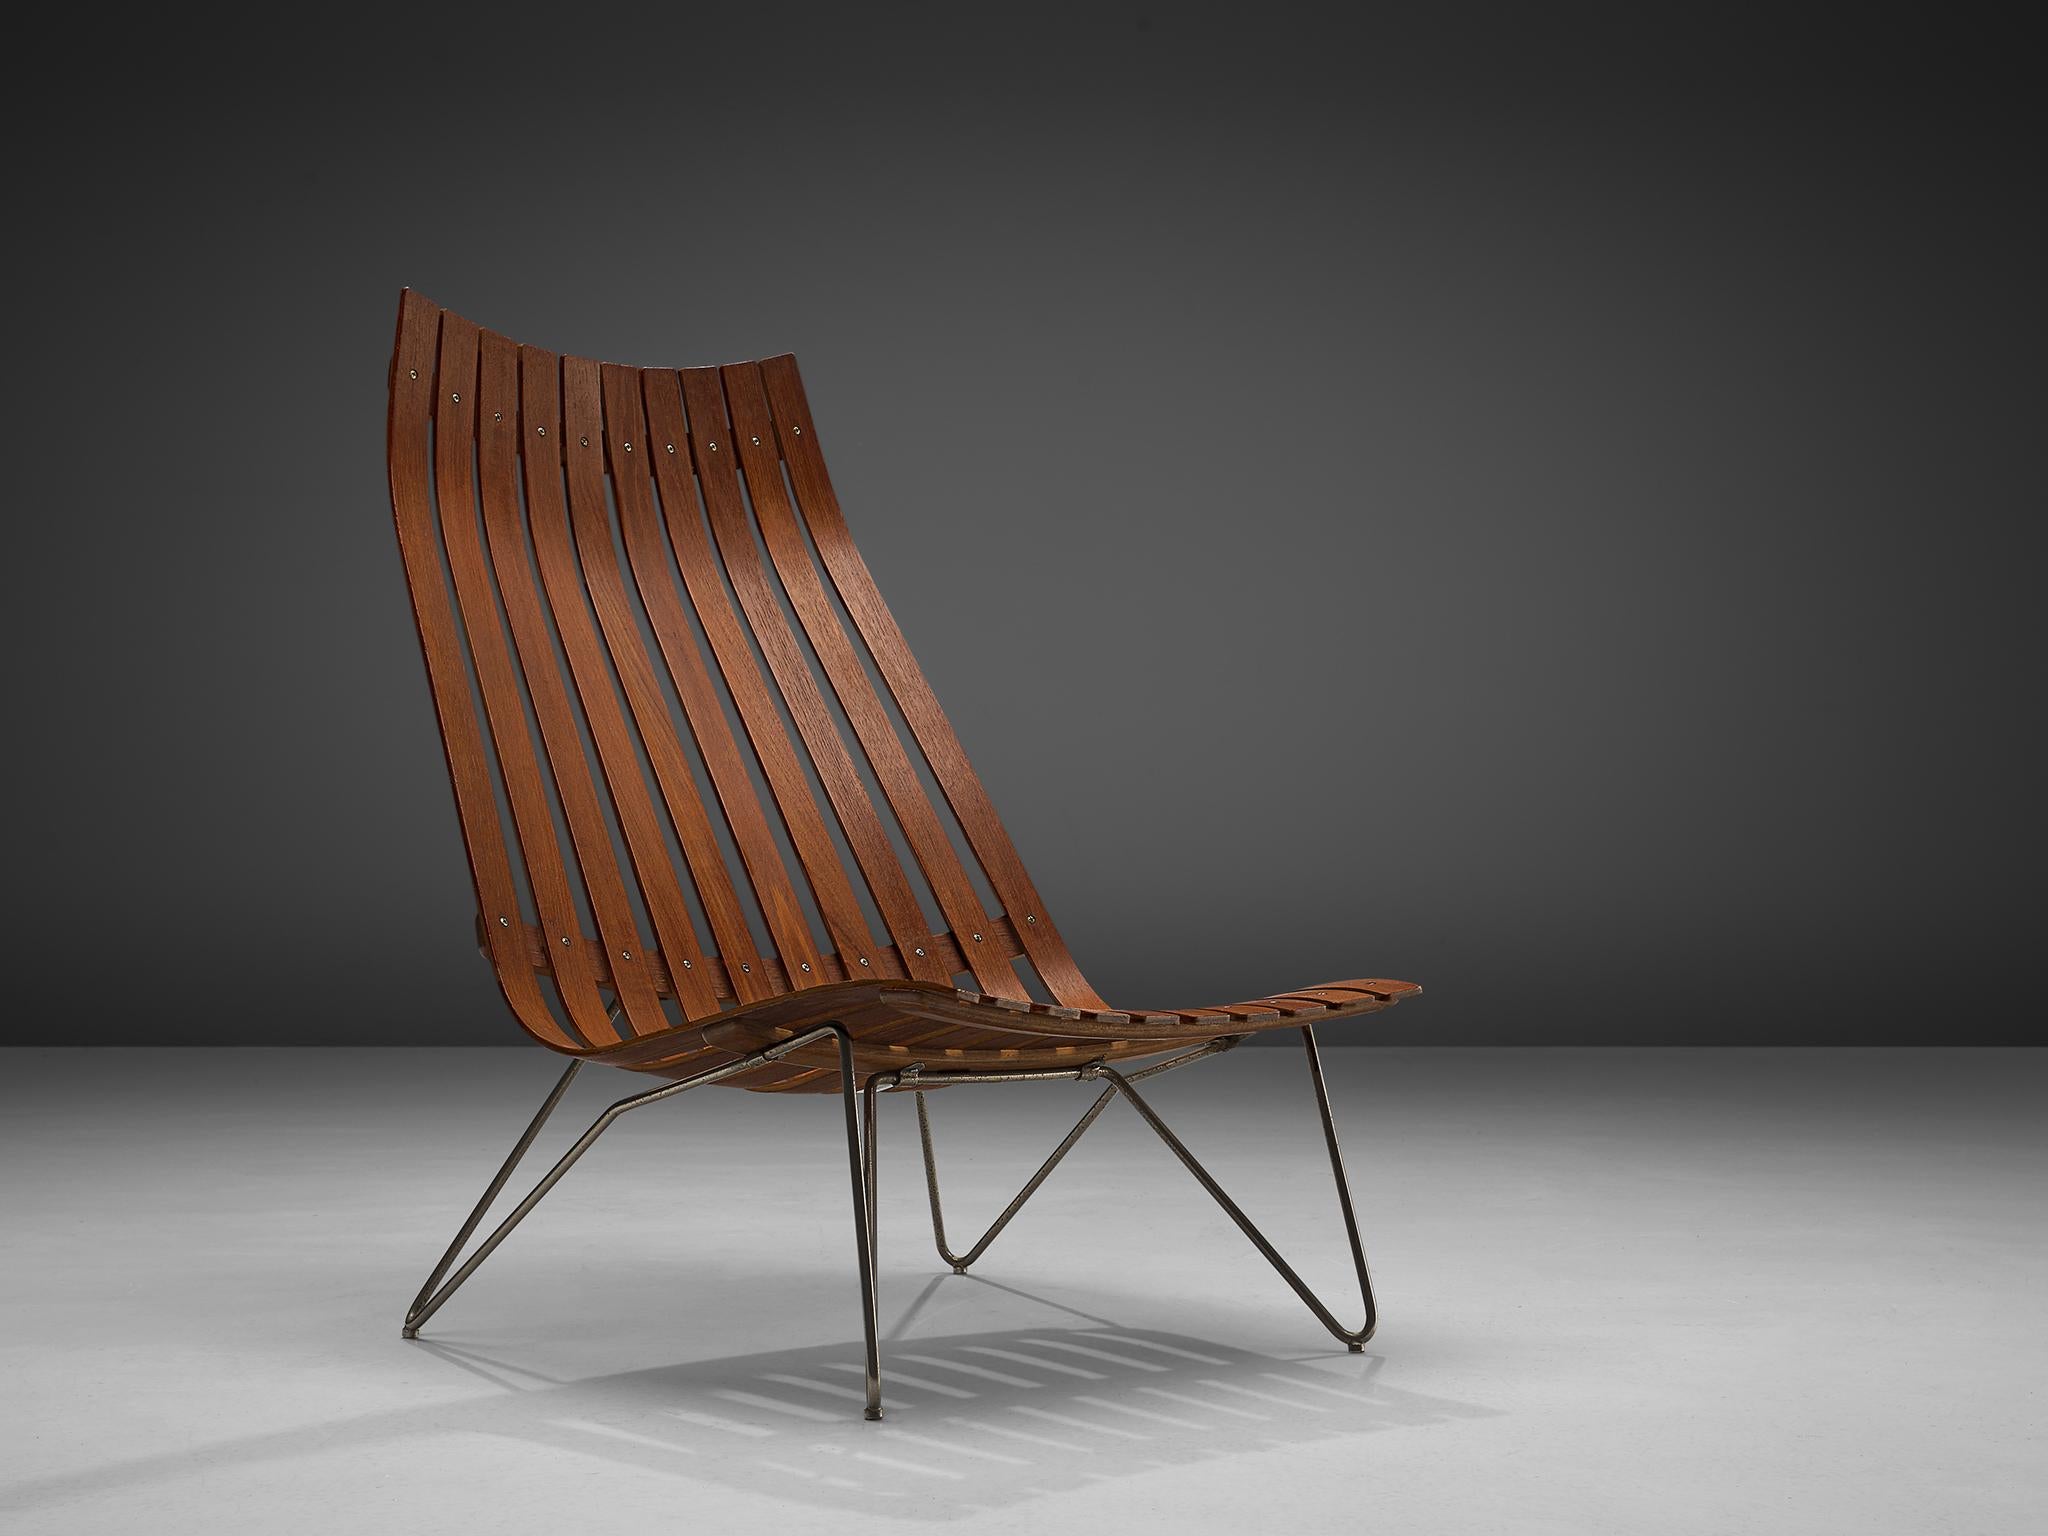 Hans Brattrud for Hove Mobler, lounge chair model 'Scandia' in teak and metal, Norway, circa 1957. 

This chair was part of the Scandia series, designed by Norwegian designer Hans Brattrud and produced by Hove Mobler. The chair is executed in bent